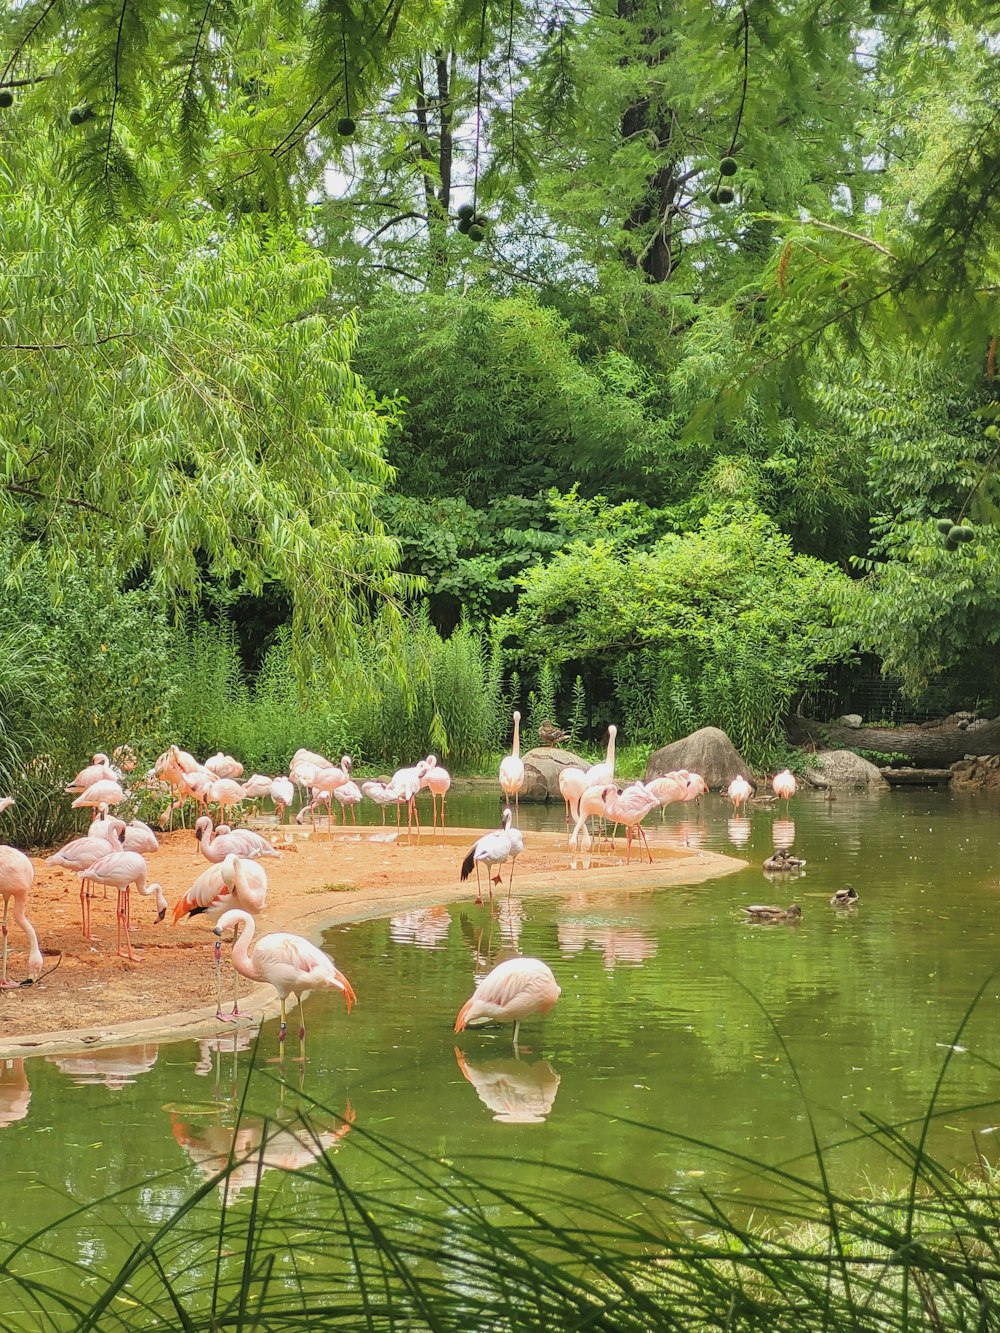 a group of flamingos standing around in a pond